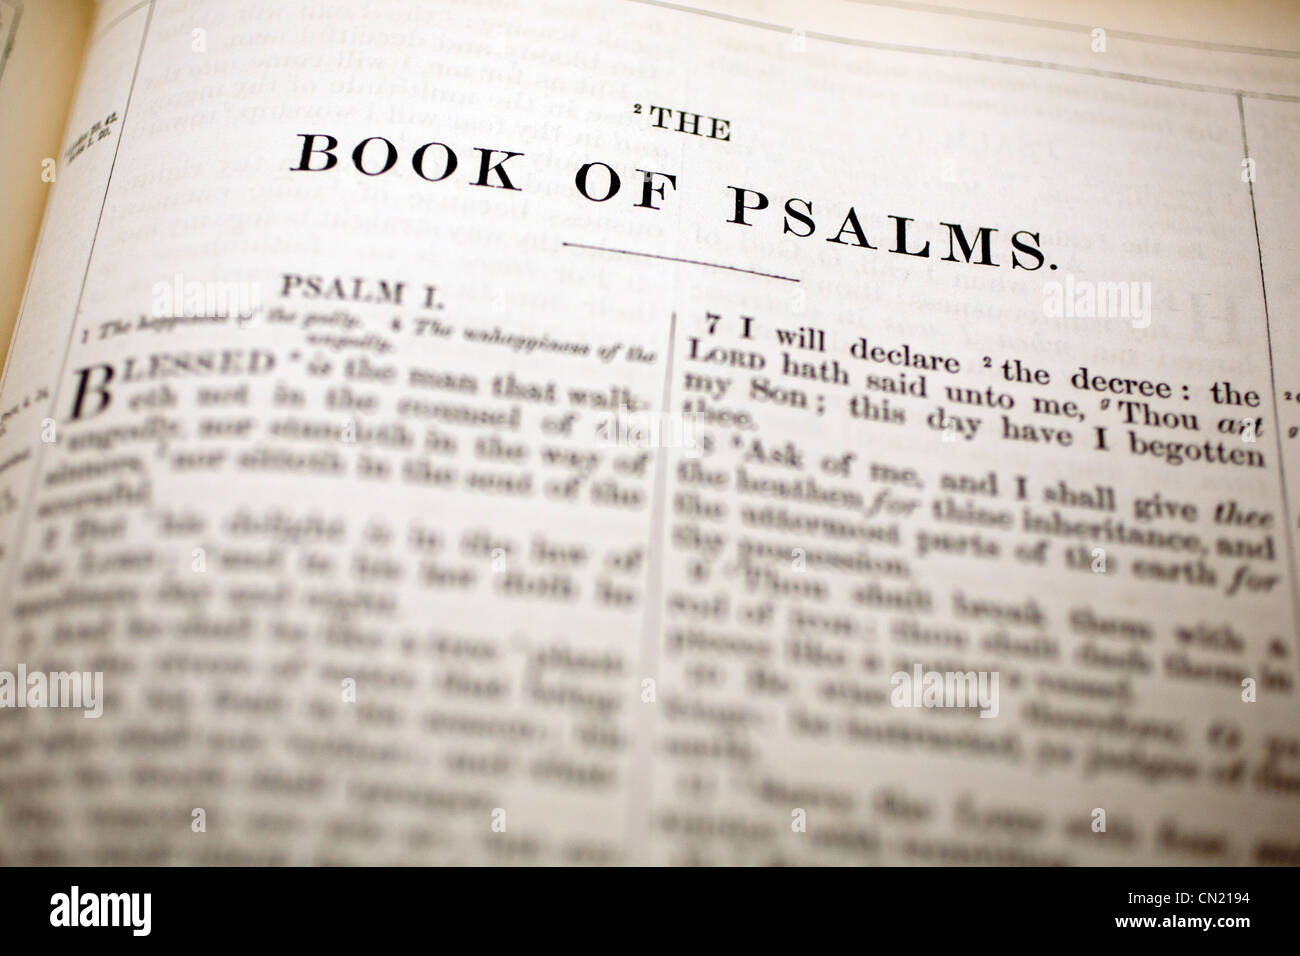 The Book of Psalms bible heading Stock Photo